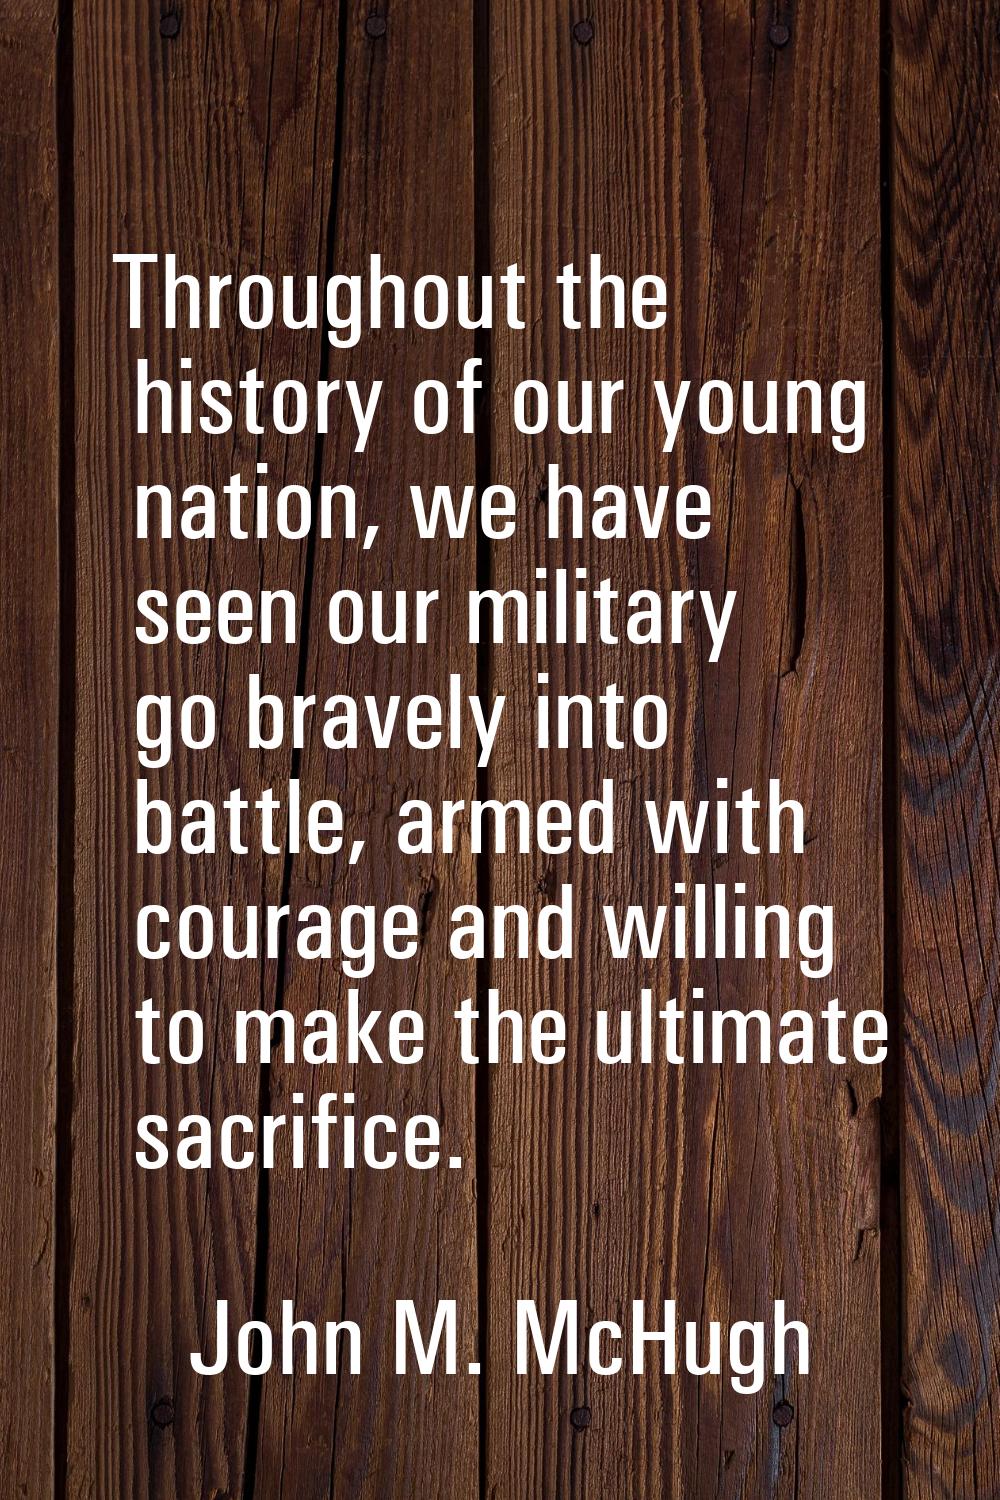 Throughout the history of our young nation, we have seen our military go bravely into battle, armed